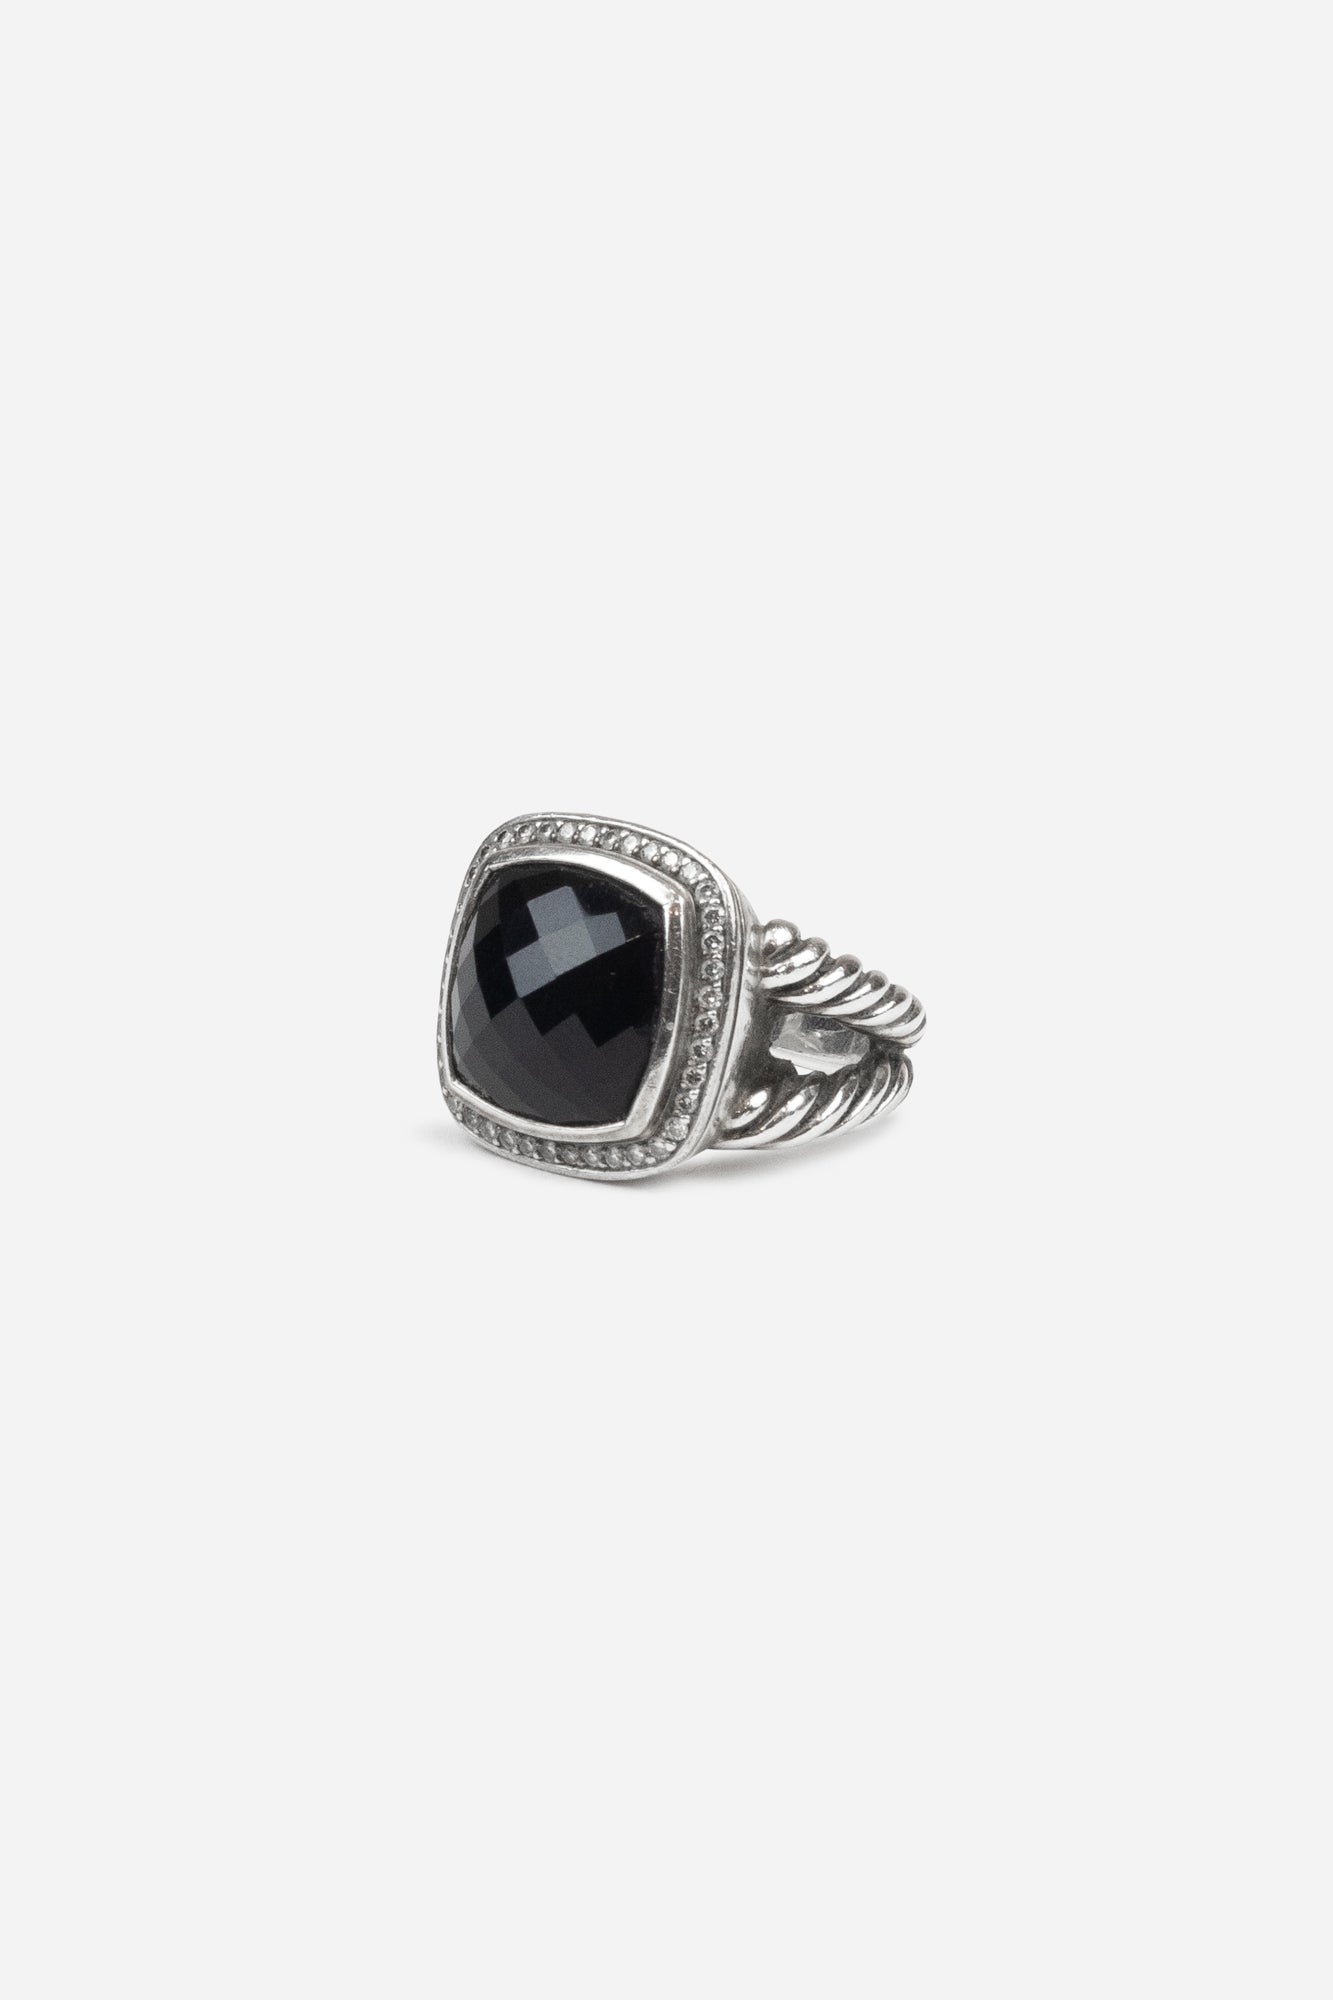 Silver, Onyx and Diamonds Albion Ring